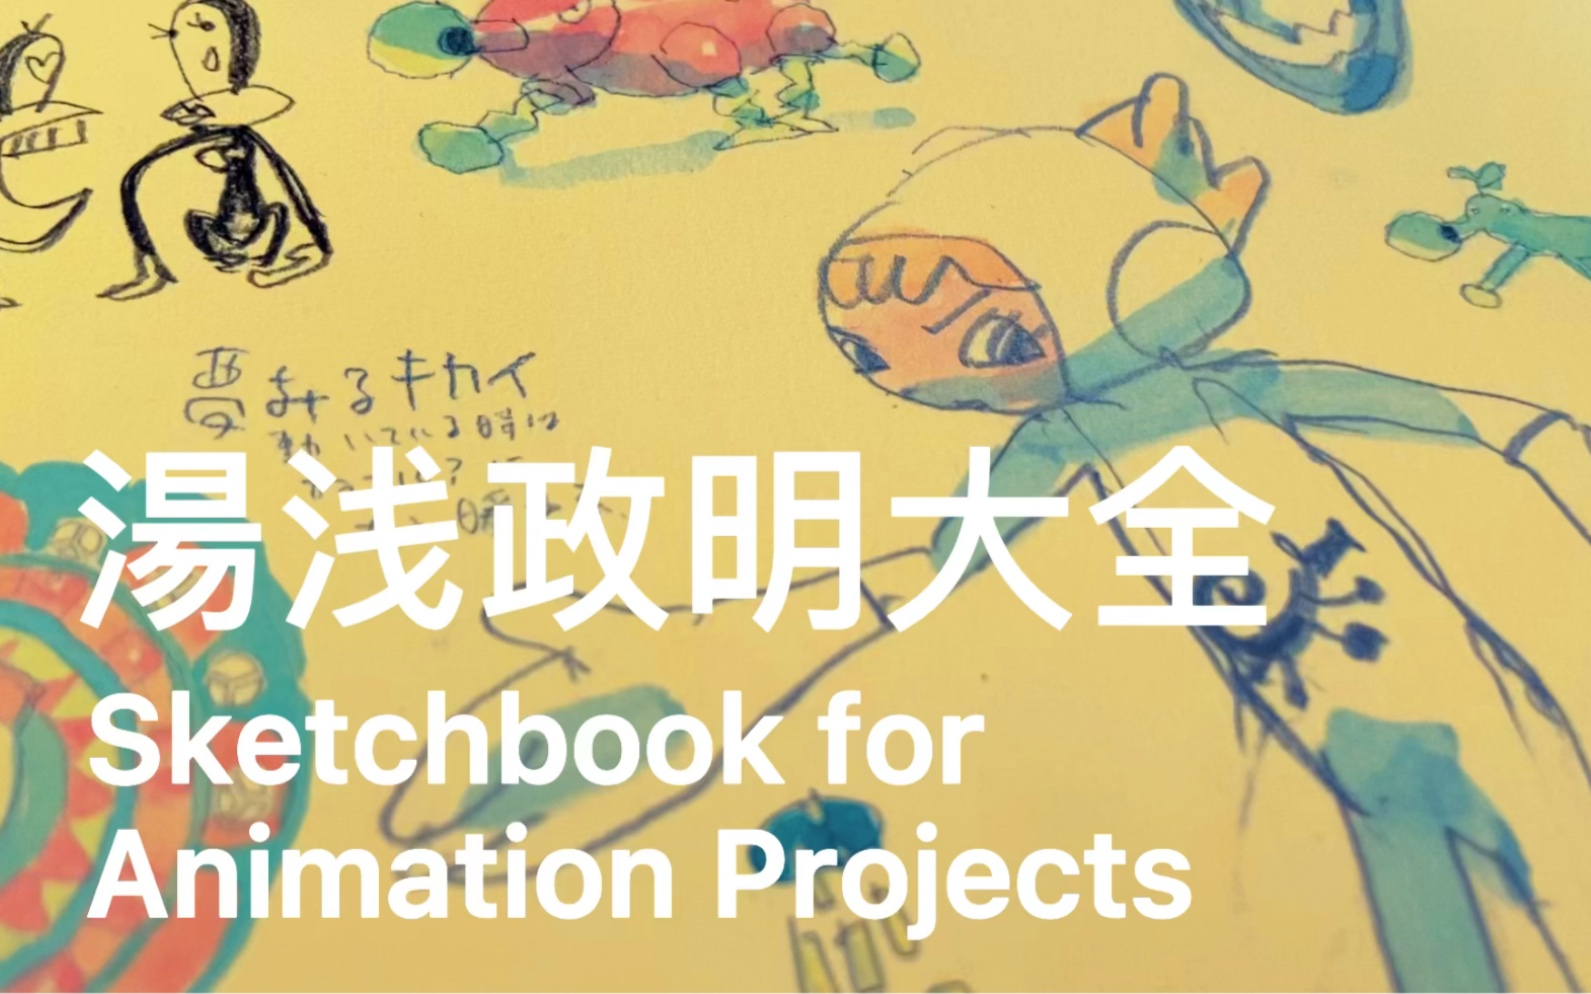 ［book review］汤浅政明大全Sketchbook for Animation Projects_哔 